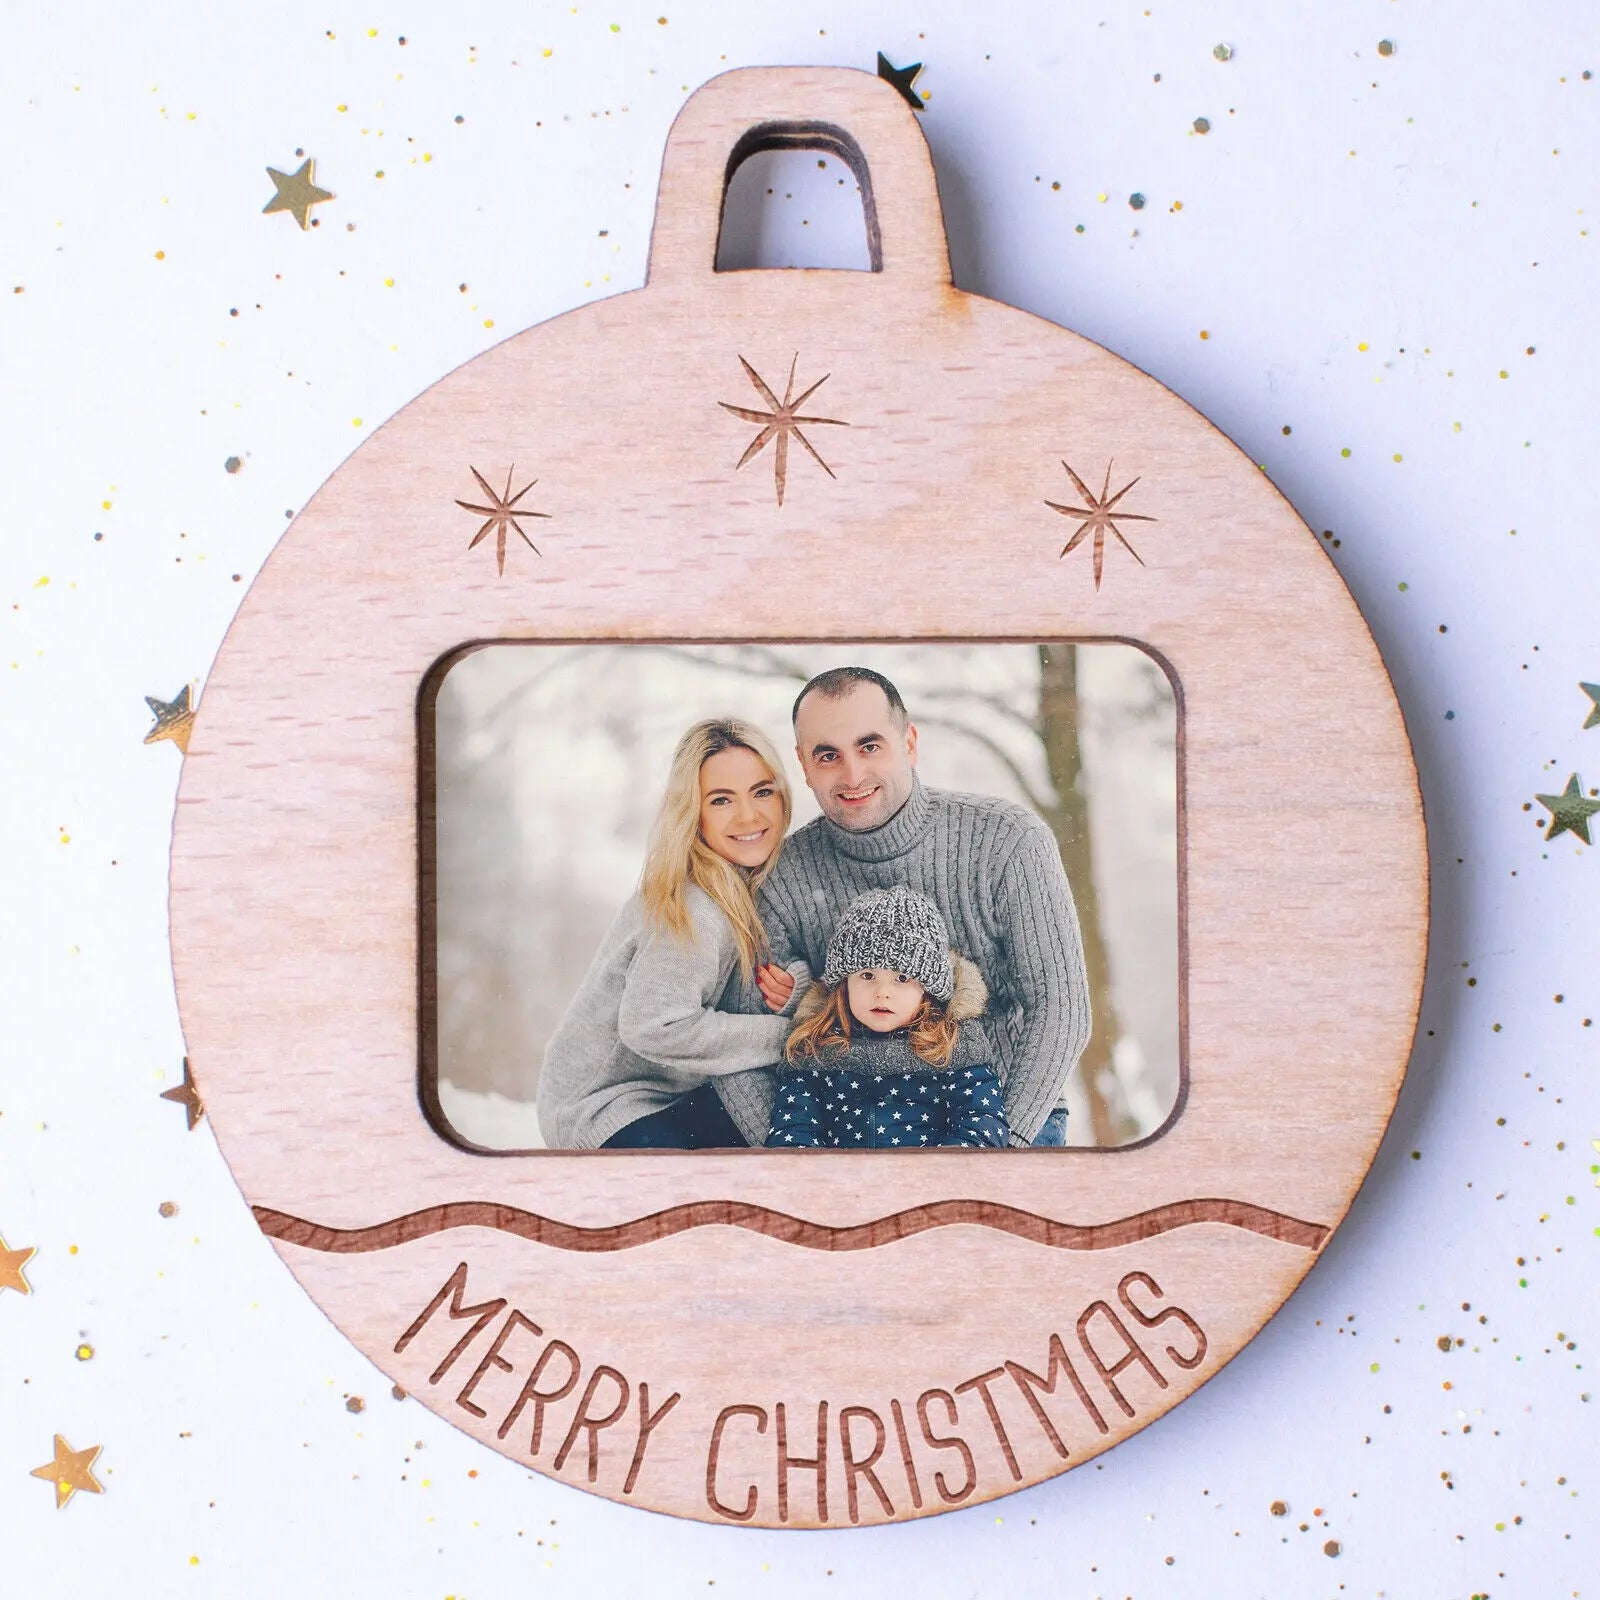 Personalised Christmas Ornament - Round - CushionPop